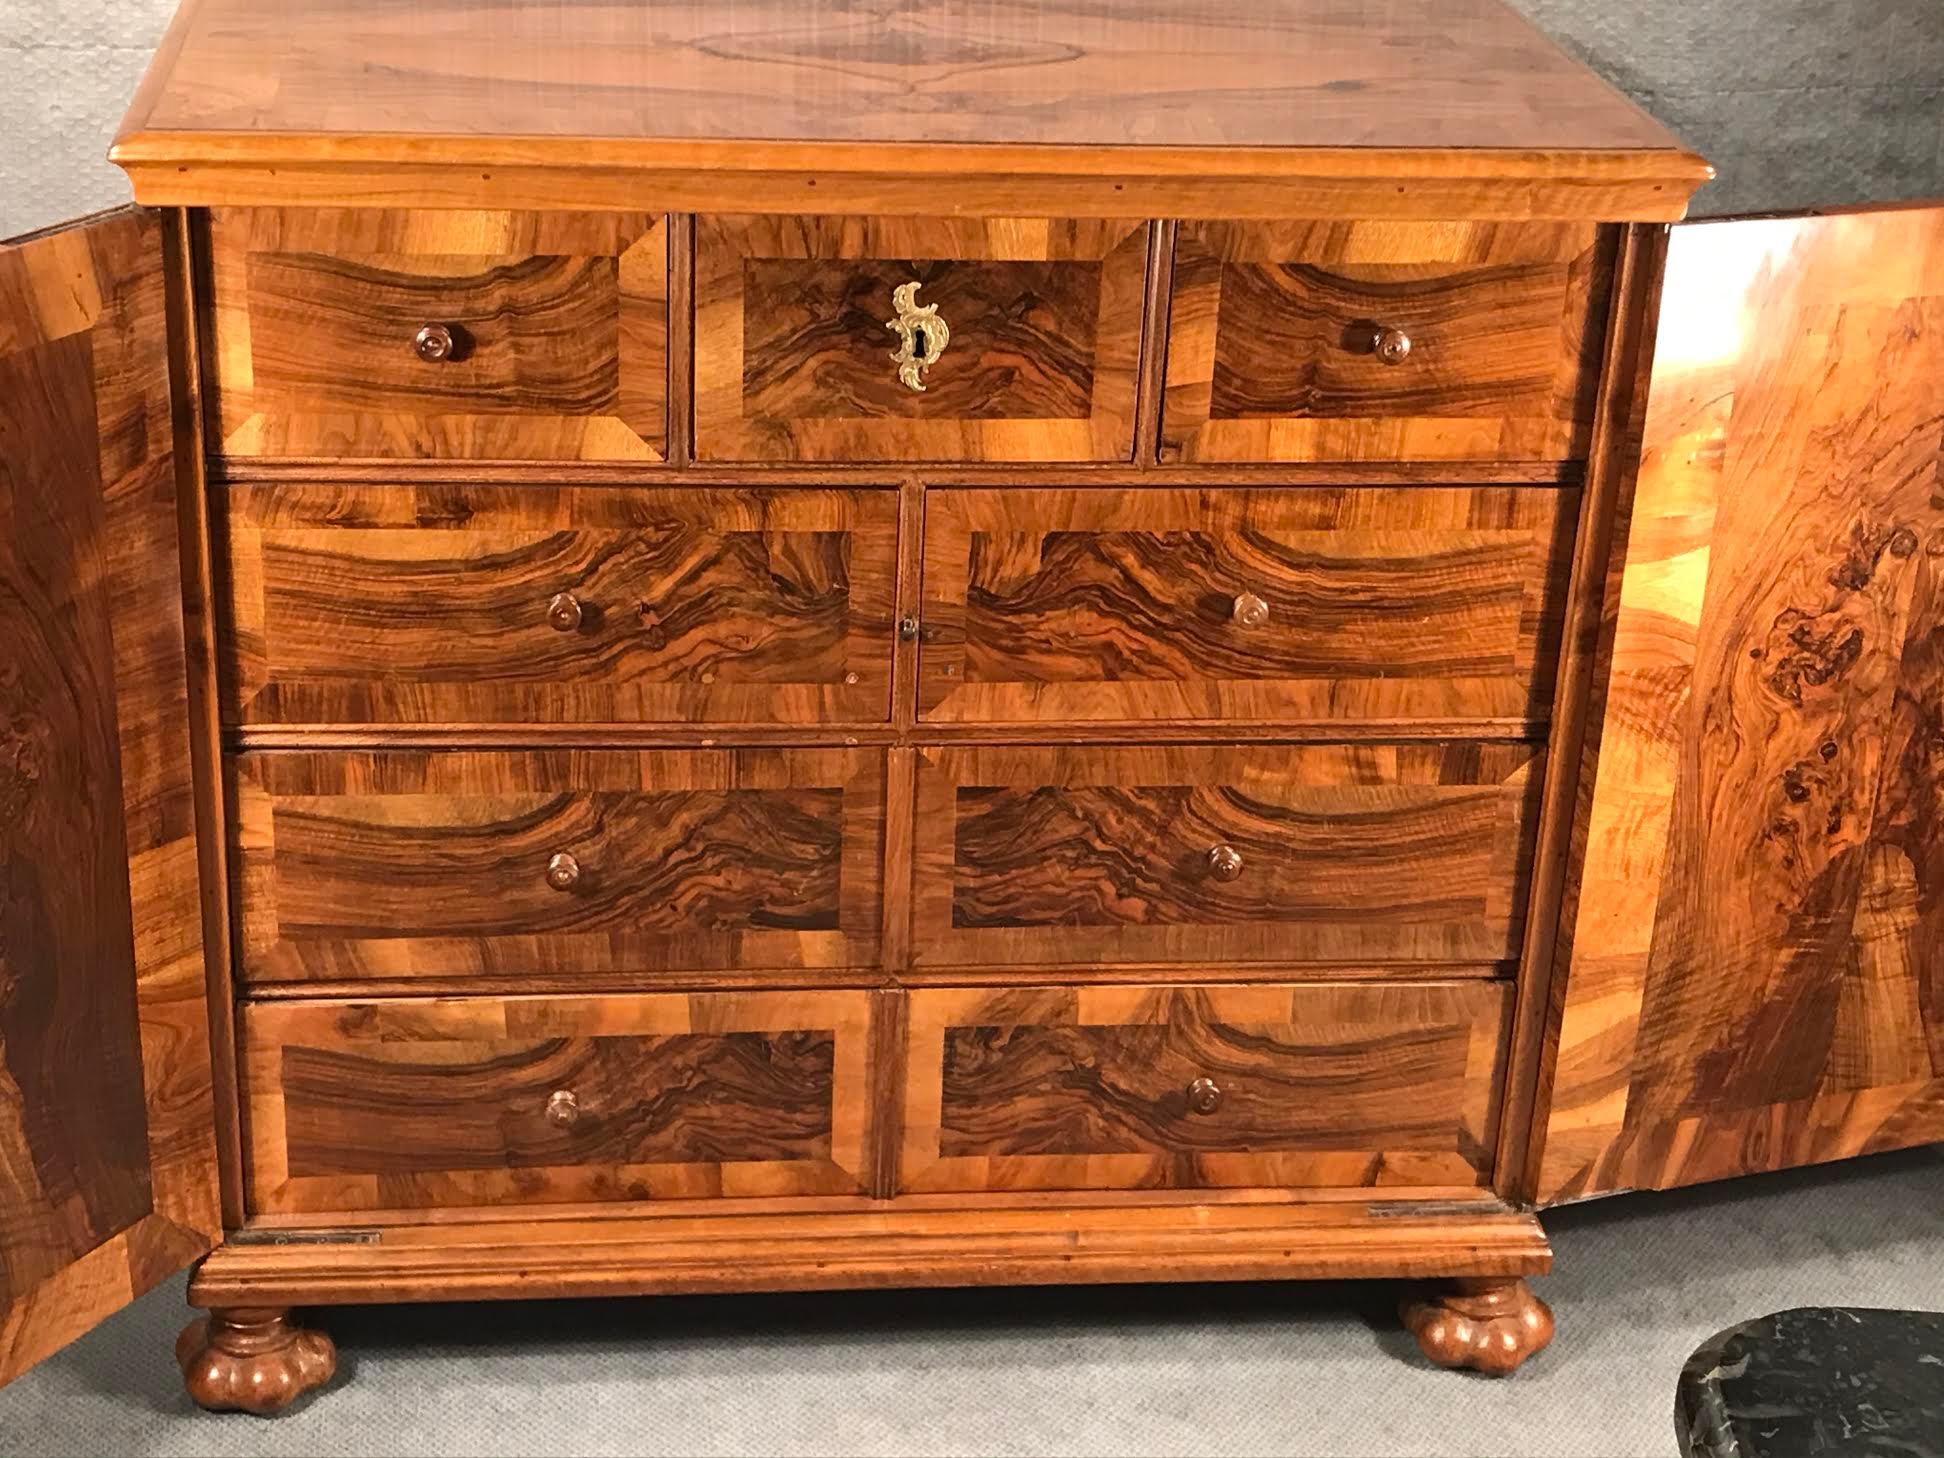 This Baroque cabinet dates back to the second half of the 18th century and comes from Switzerland. The cabinet has two doors, behind them are 9 smaller drawers. The drawers and the outside and inside of the doors have a gorgeous walnut veneer.